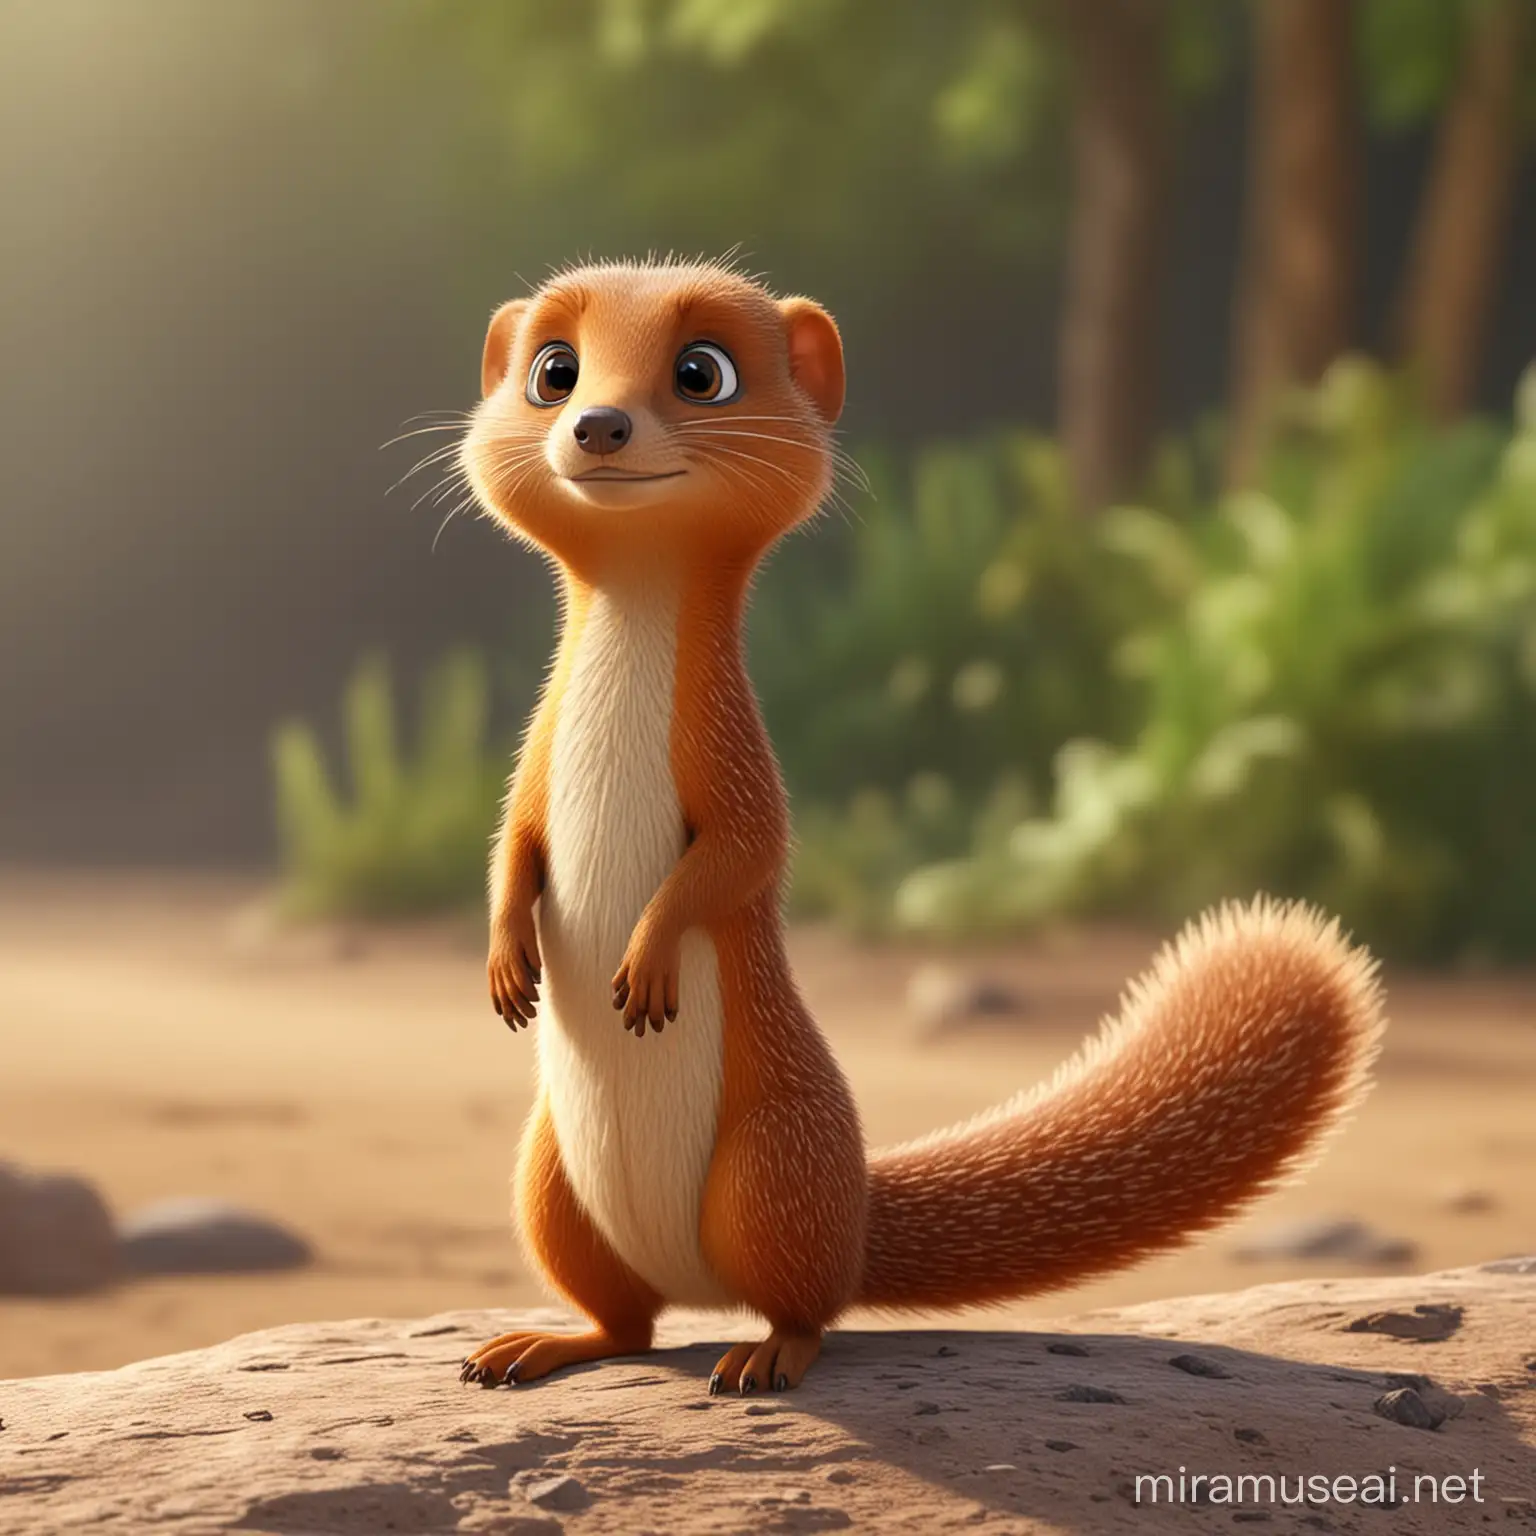 Adorable Cartoon Mongoose with Curious Expression